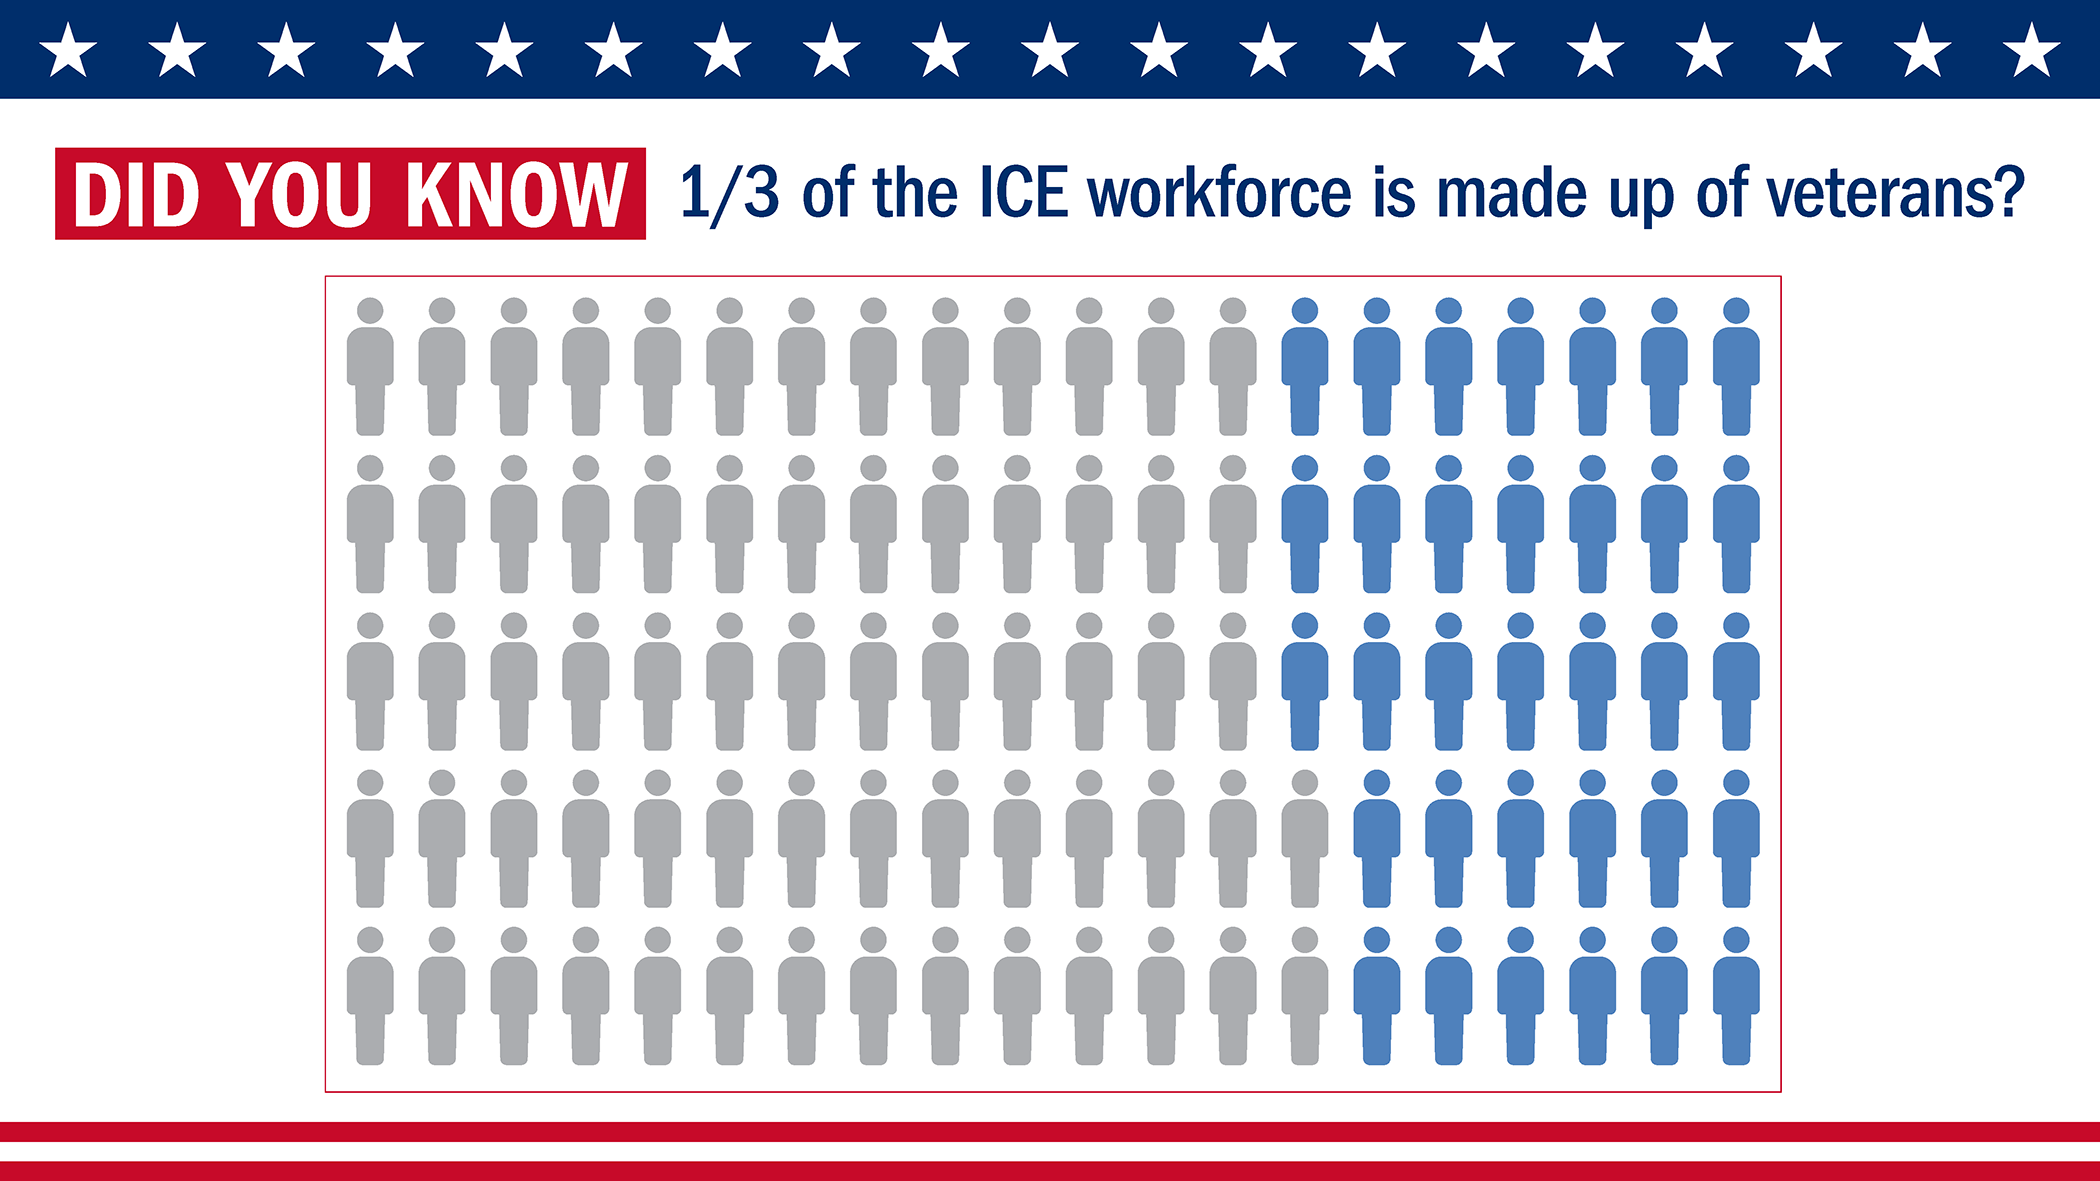 Did You Know: 1/3 of the ICE workforce is made up of veterans?